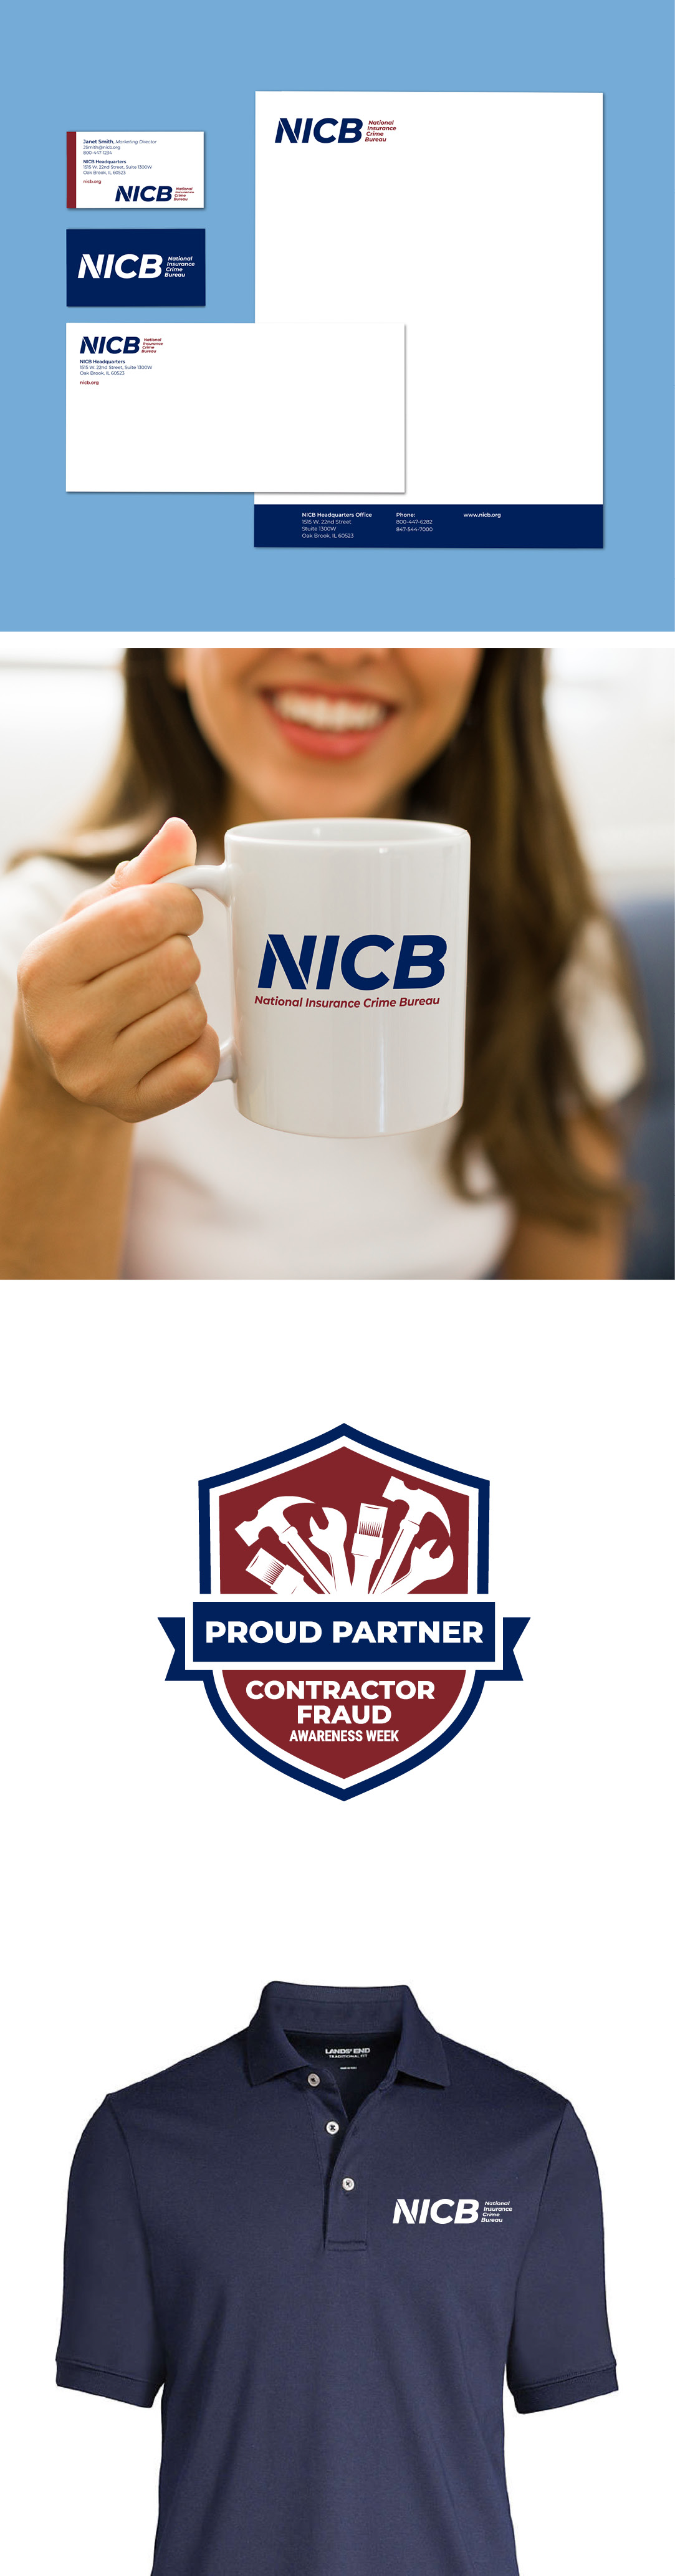 NICB branded items and letterhead